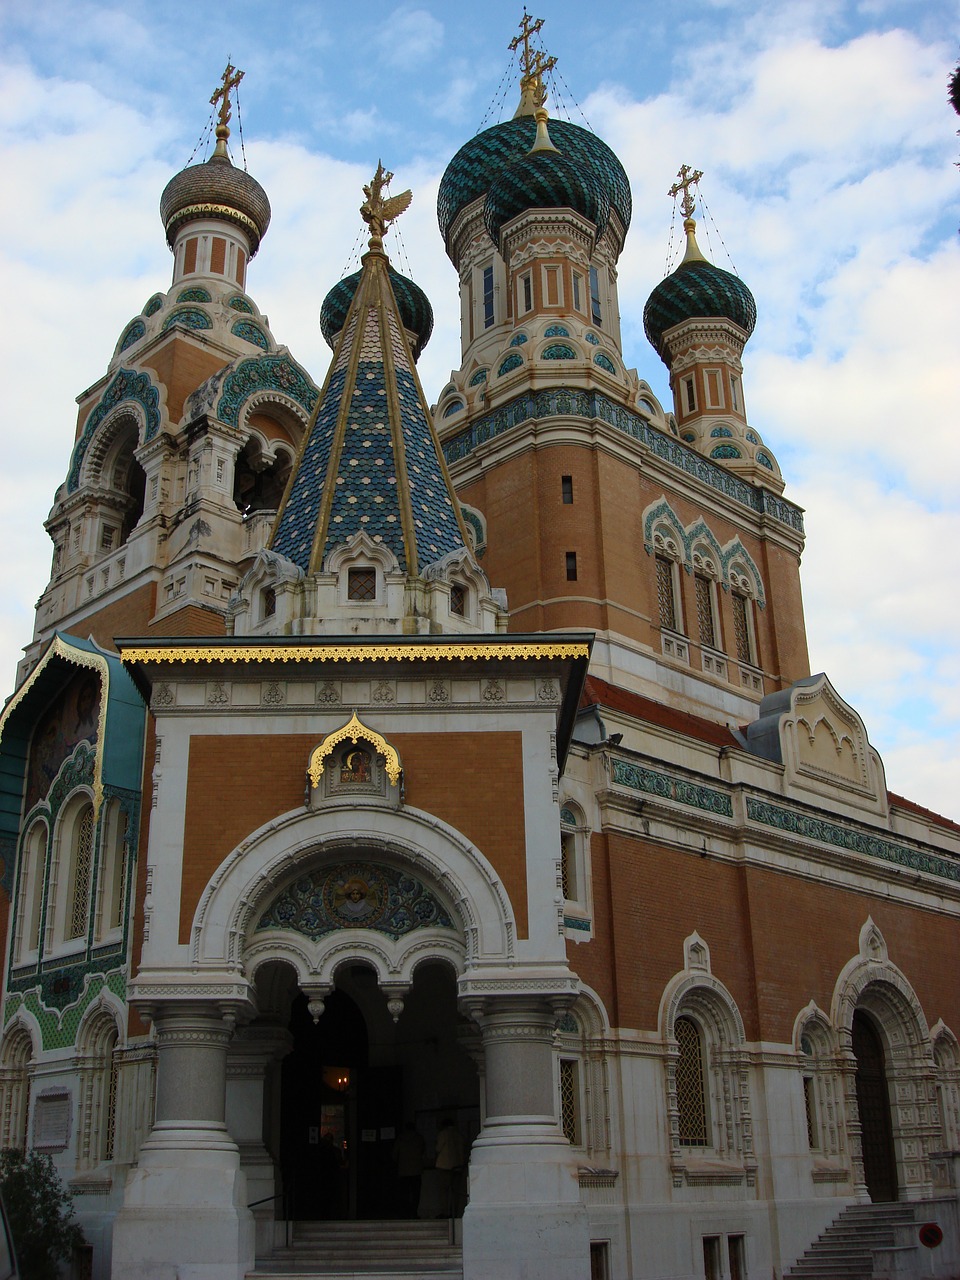 cathedral nice russian free photo